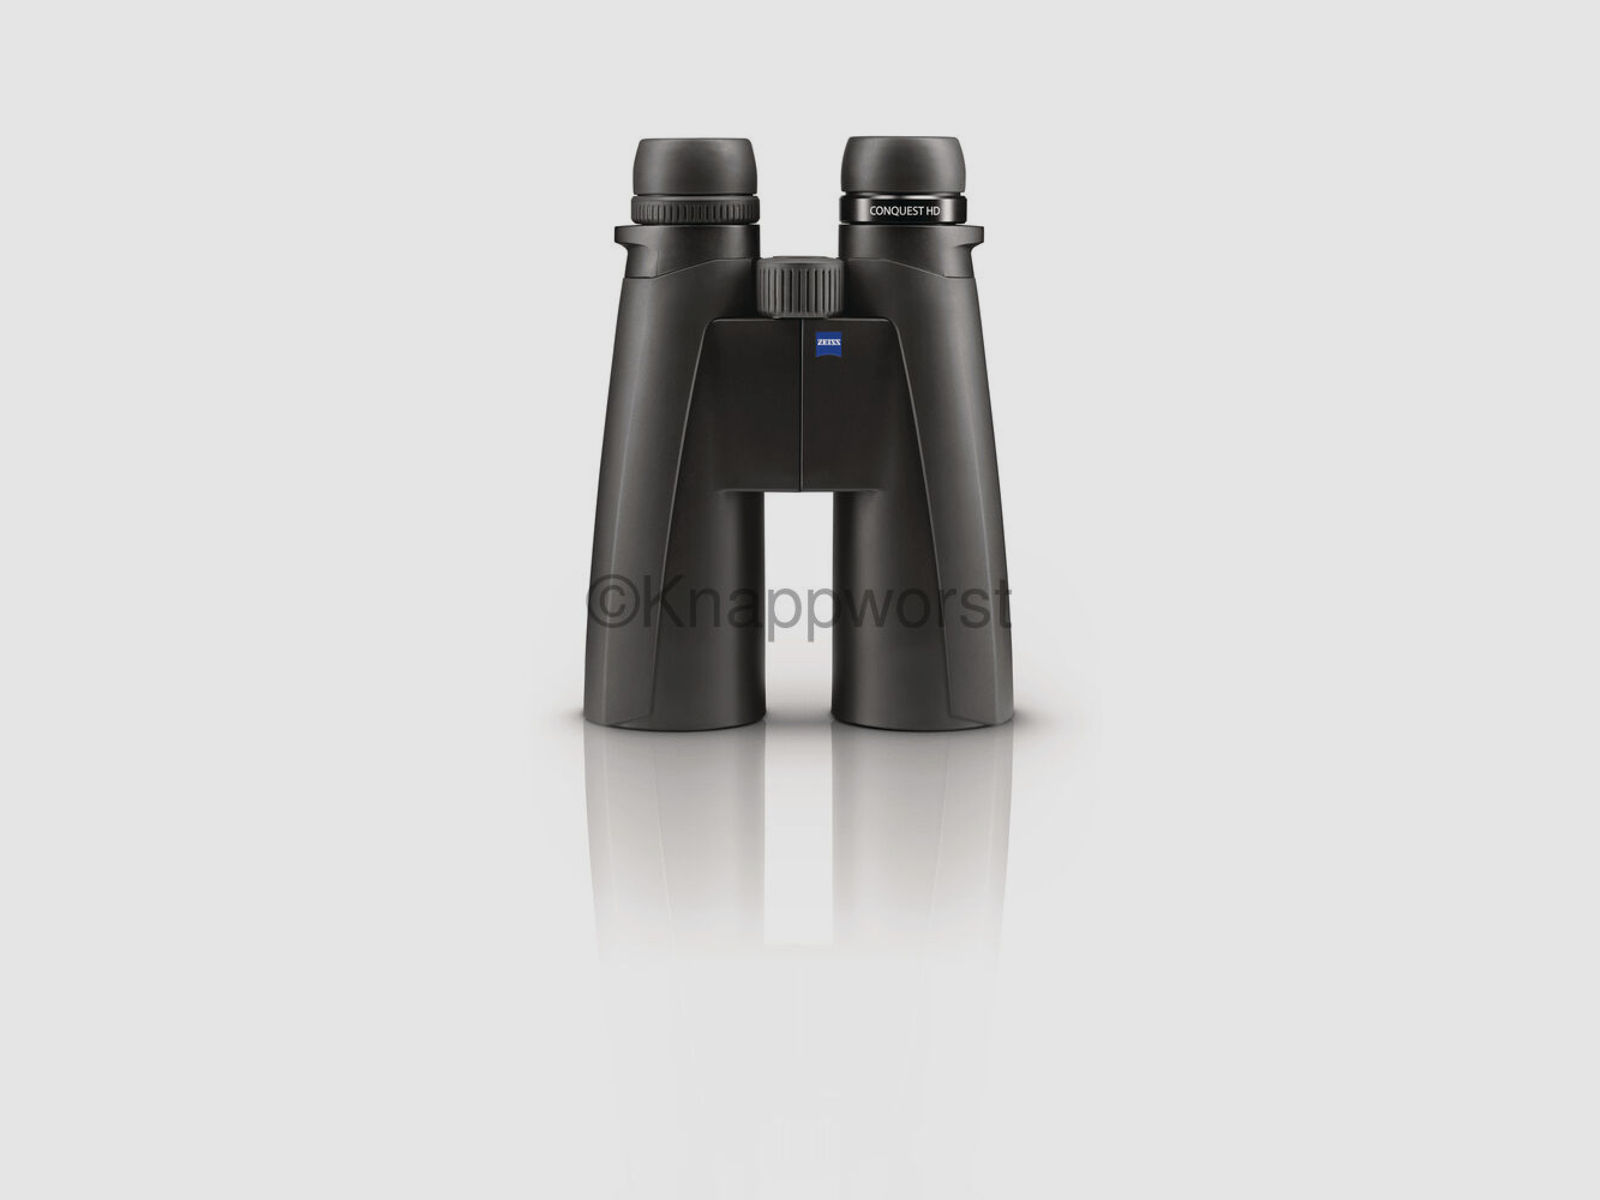 Zeiss	 Conquest HD 8x56